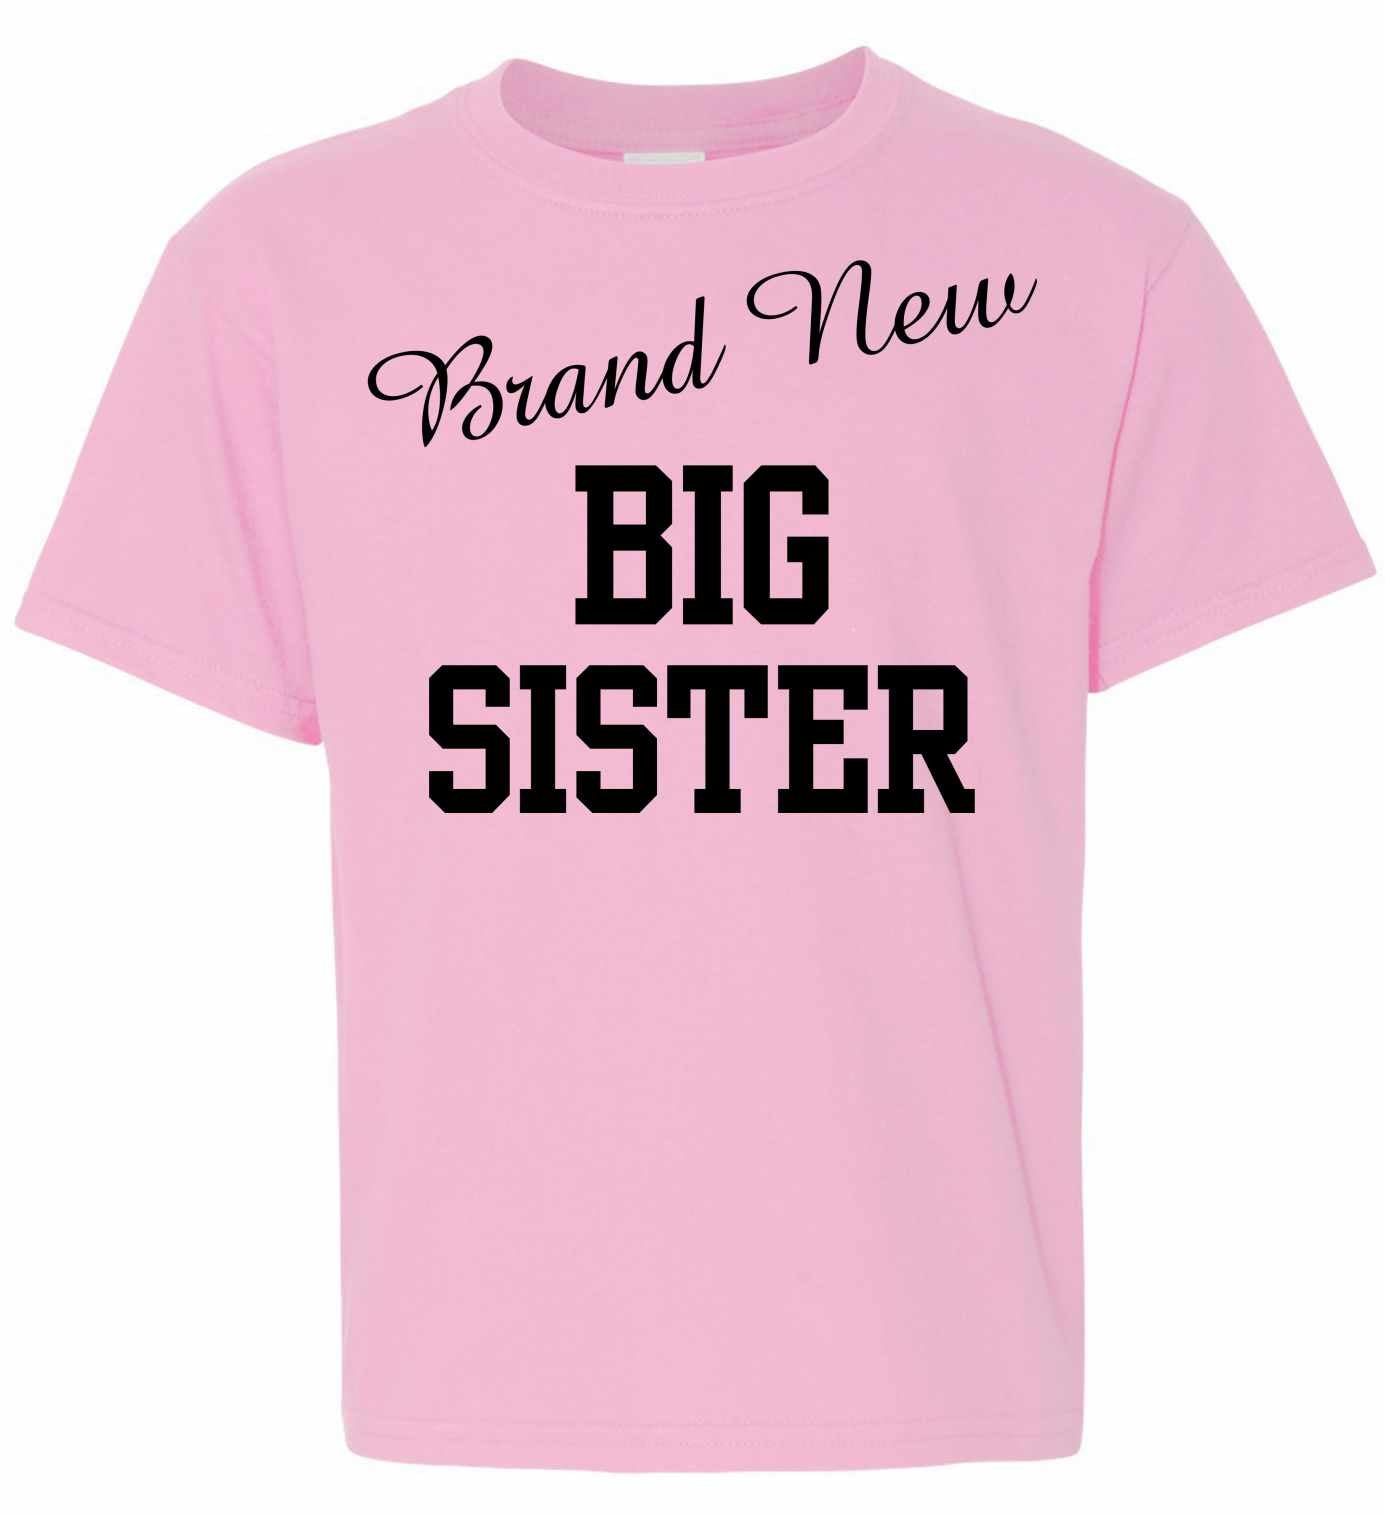 Brand New Big Sister on Youth T-Shirt (#1000-201)